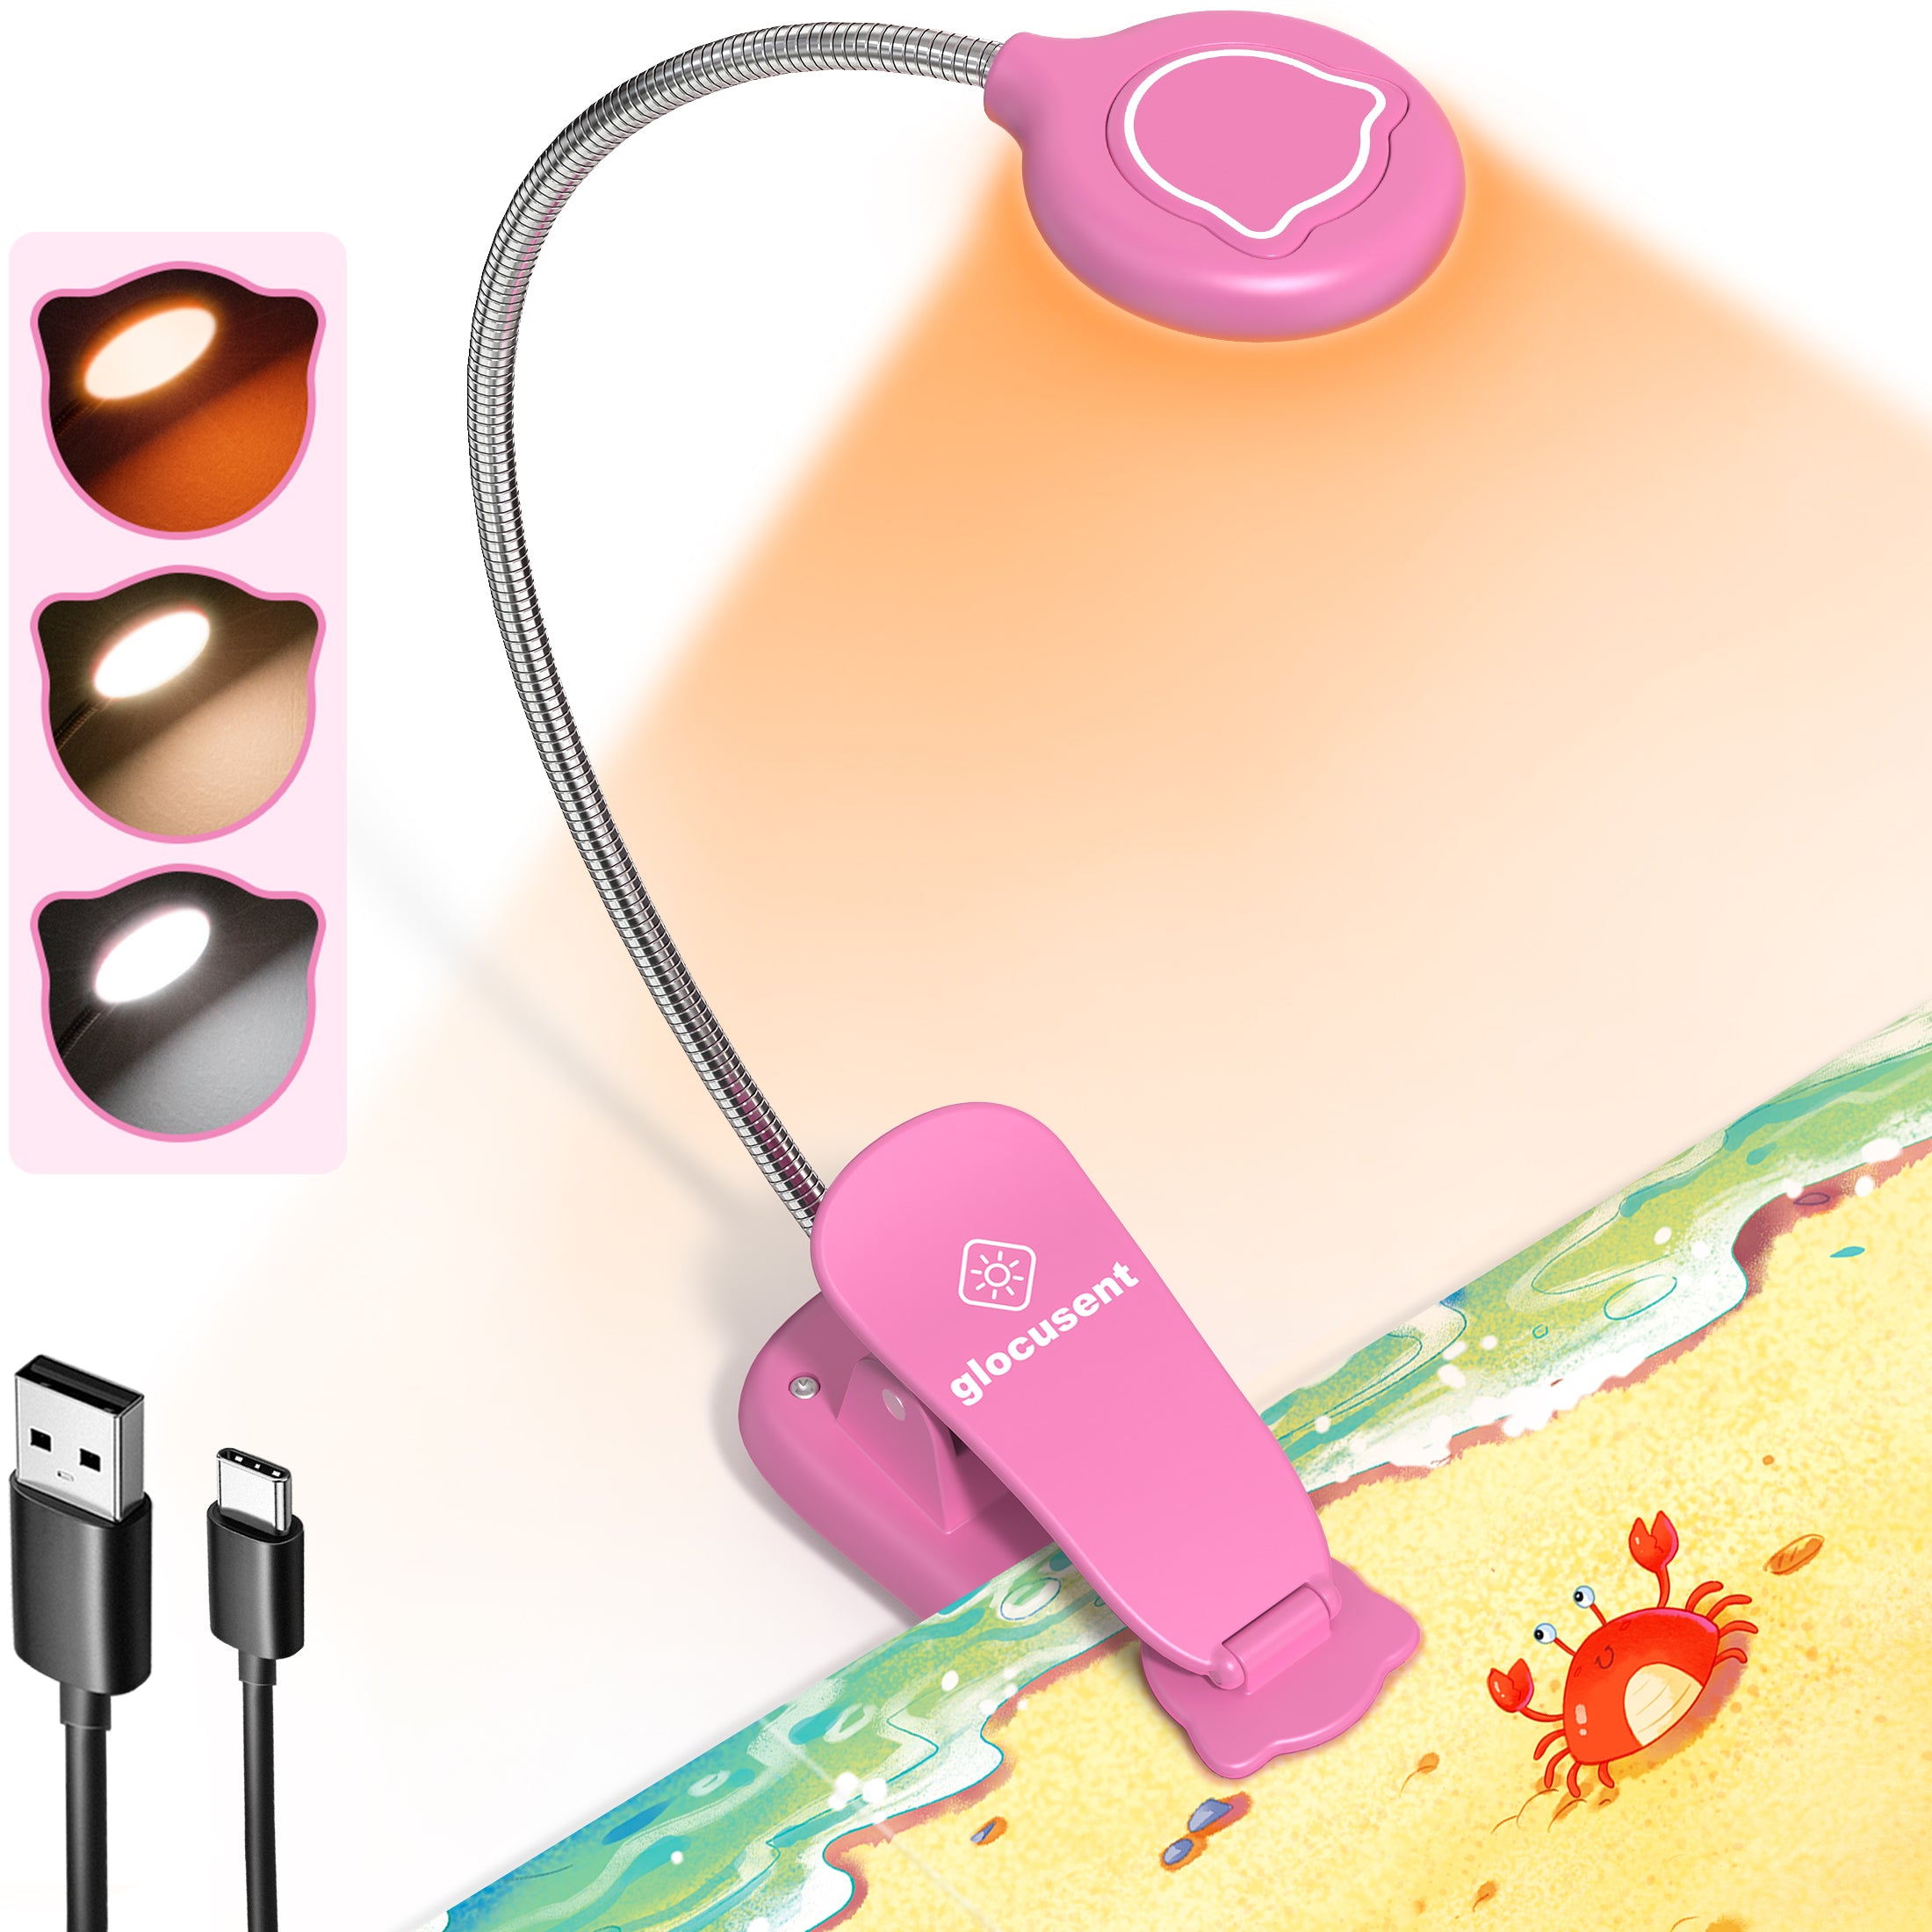 the best book reading light for kids,pink